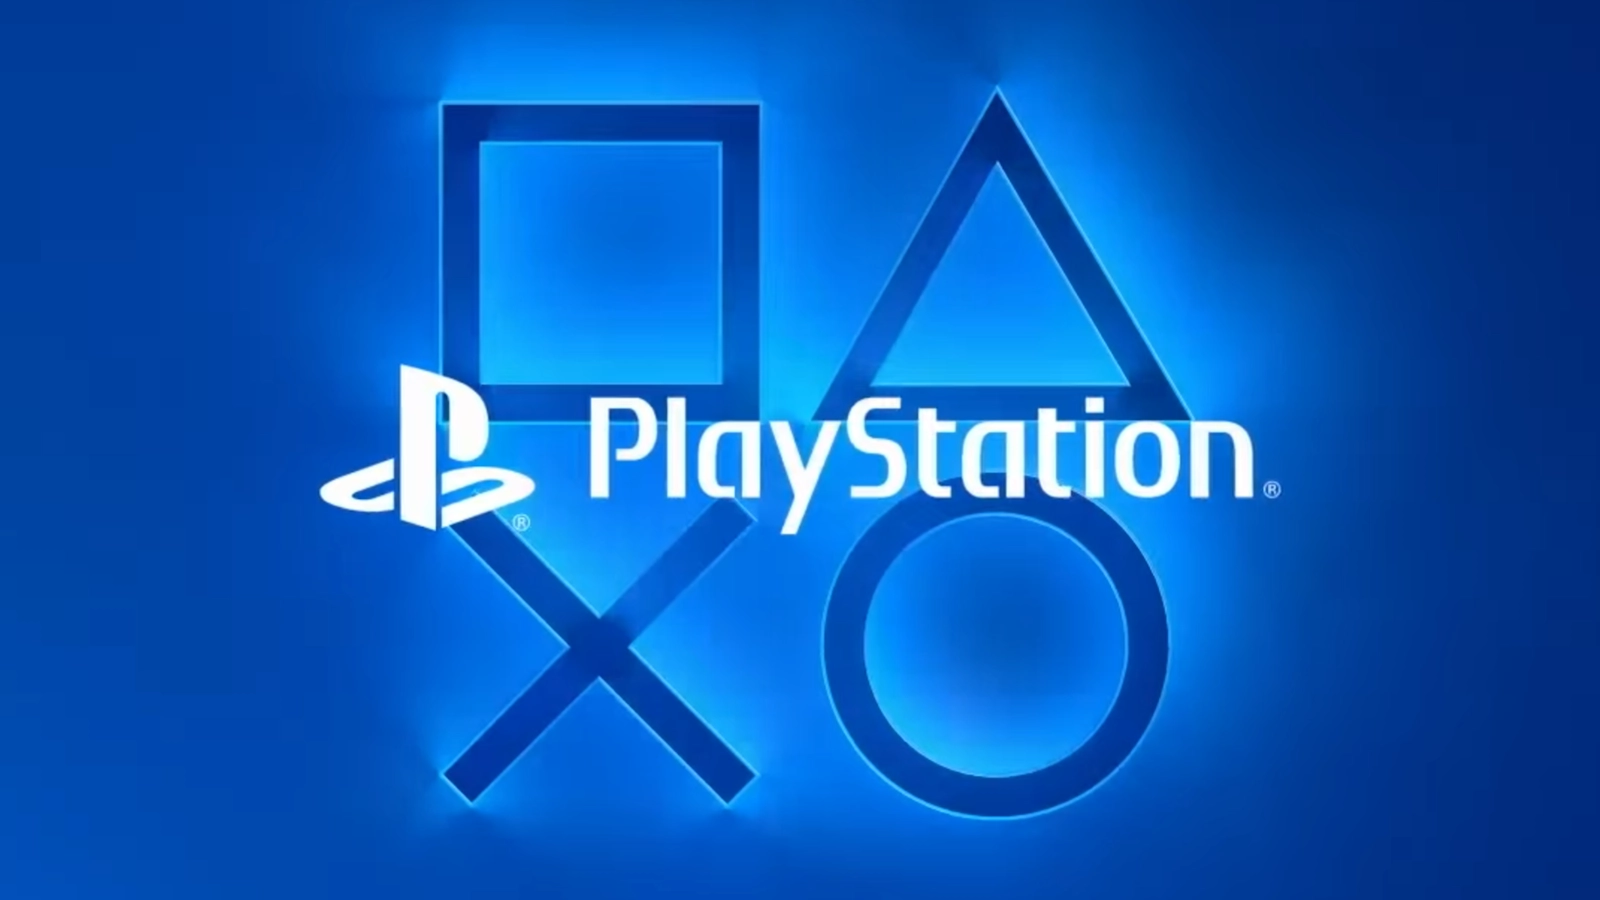 PlayStation Faces Job Losses amid Continued Industry-Downsizing